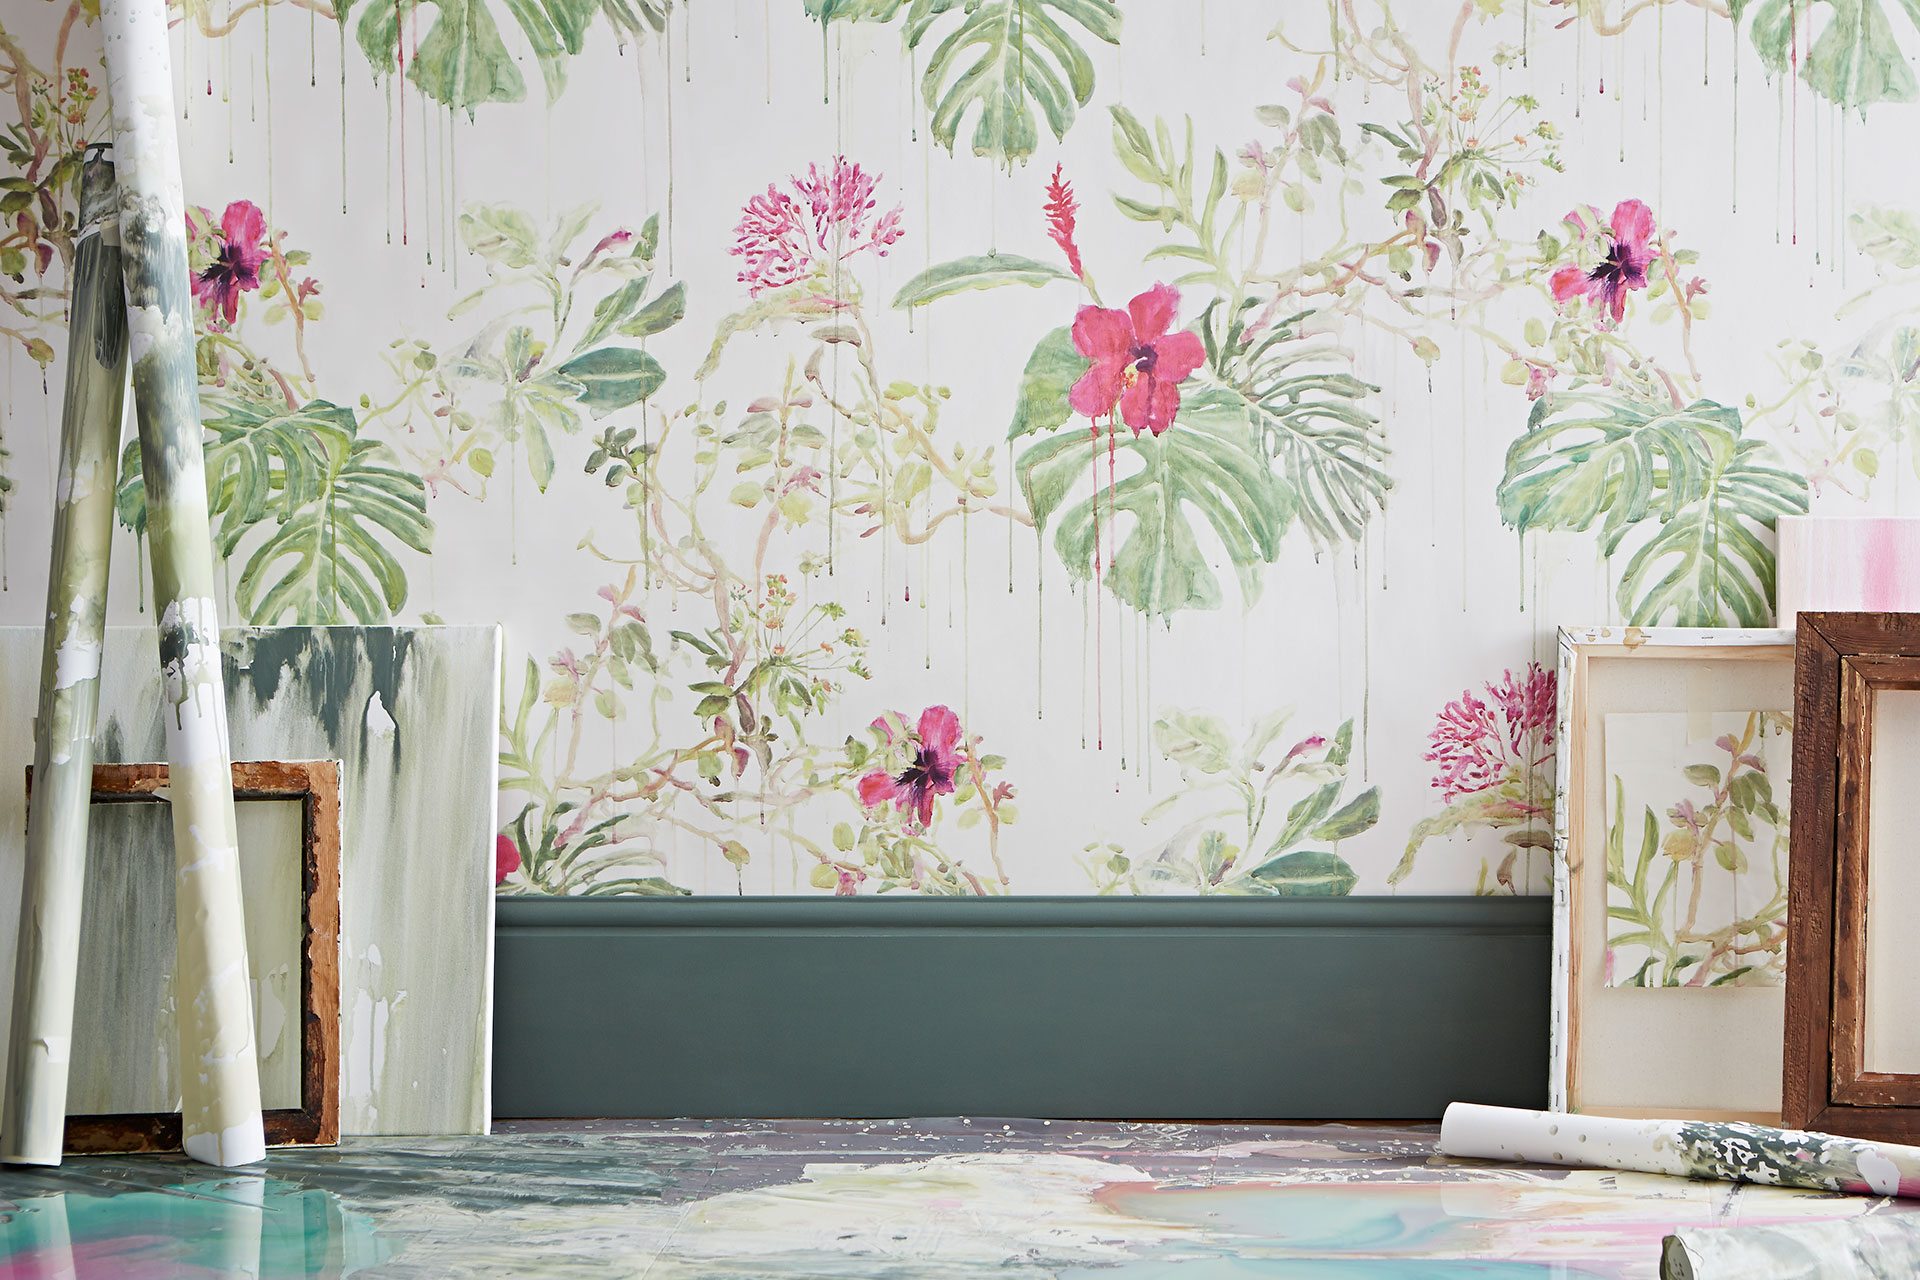 Wallpaper Ideas For Every Room Wallpaper Brands Trends